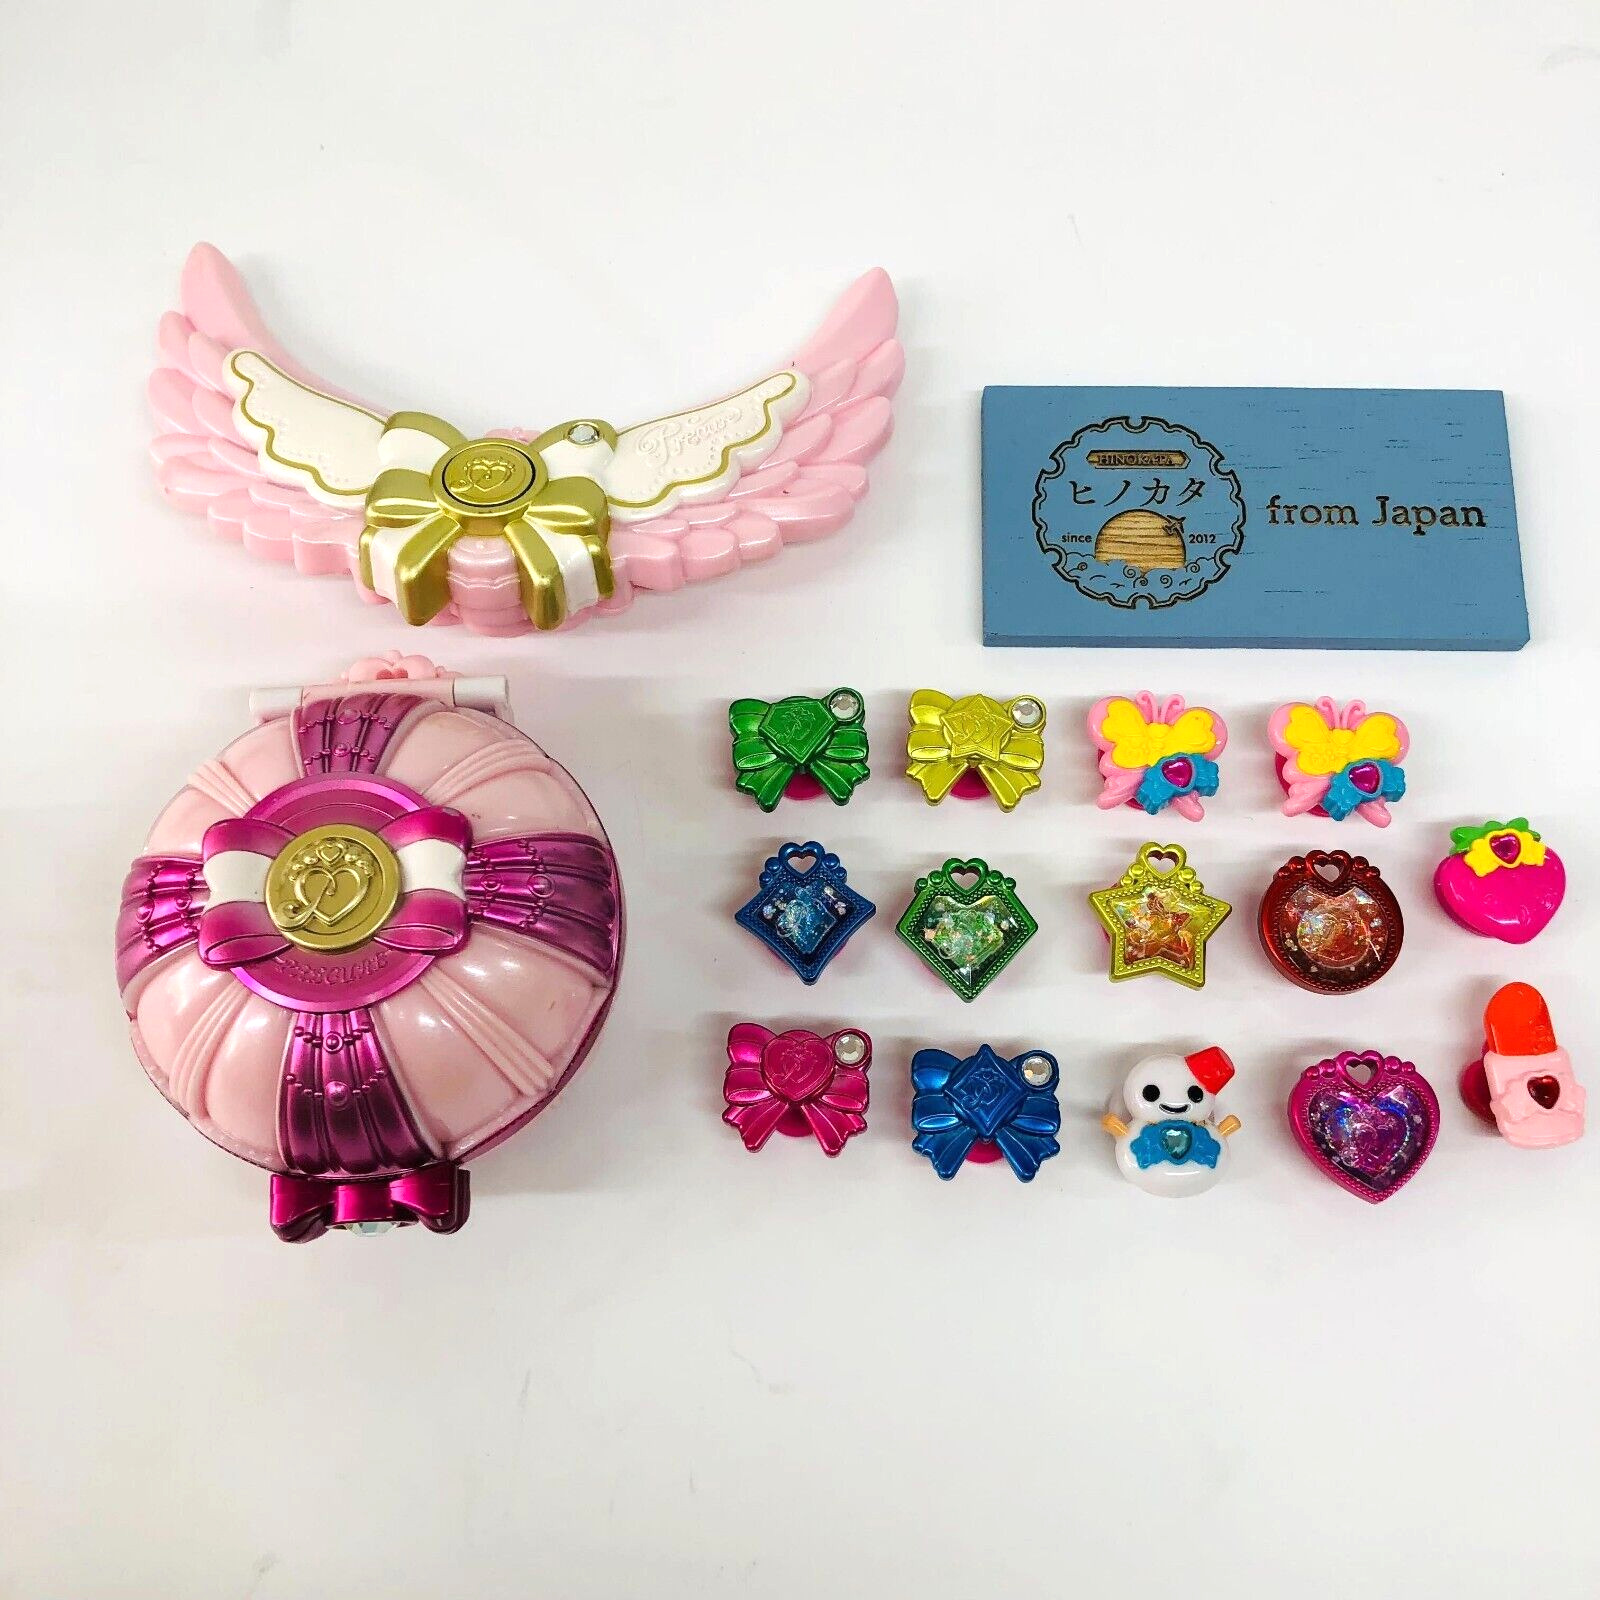 Glitter force Smile Precure Girls Toy Set Pact Compact Charm Decor Pretty Cure 